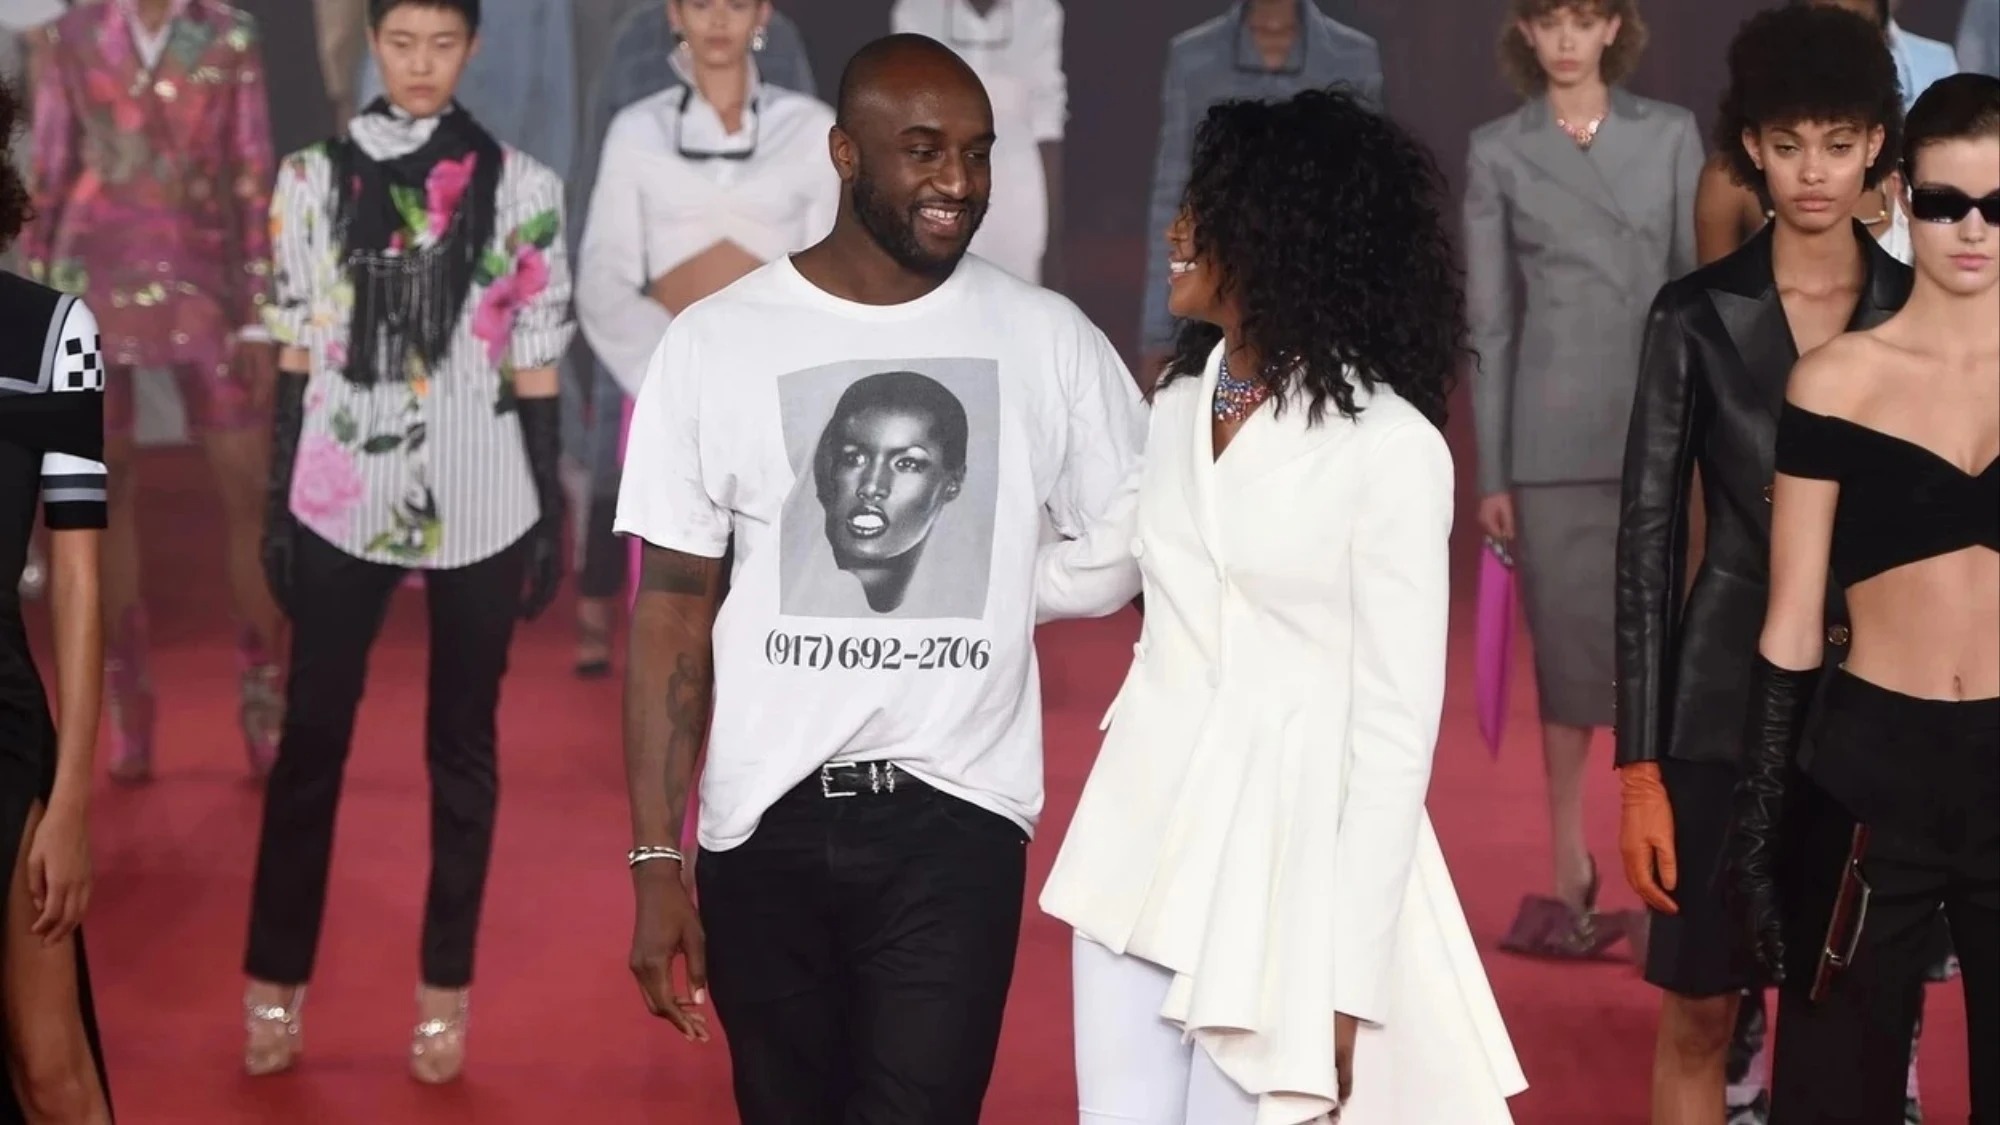 Virgil sold off white to luxury conglomerate lvmh : r/Fashiondemiks